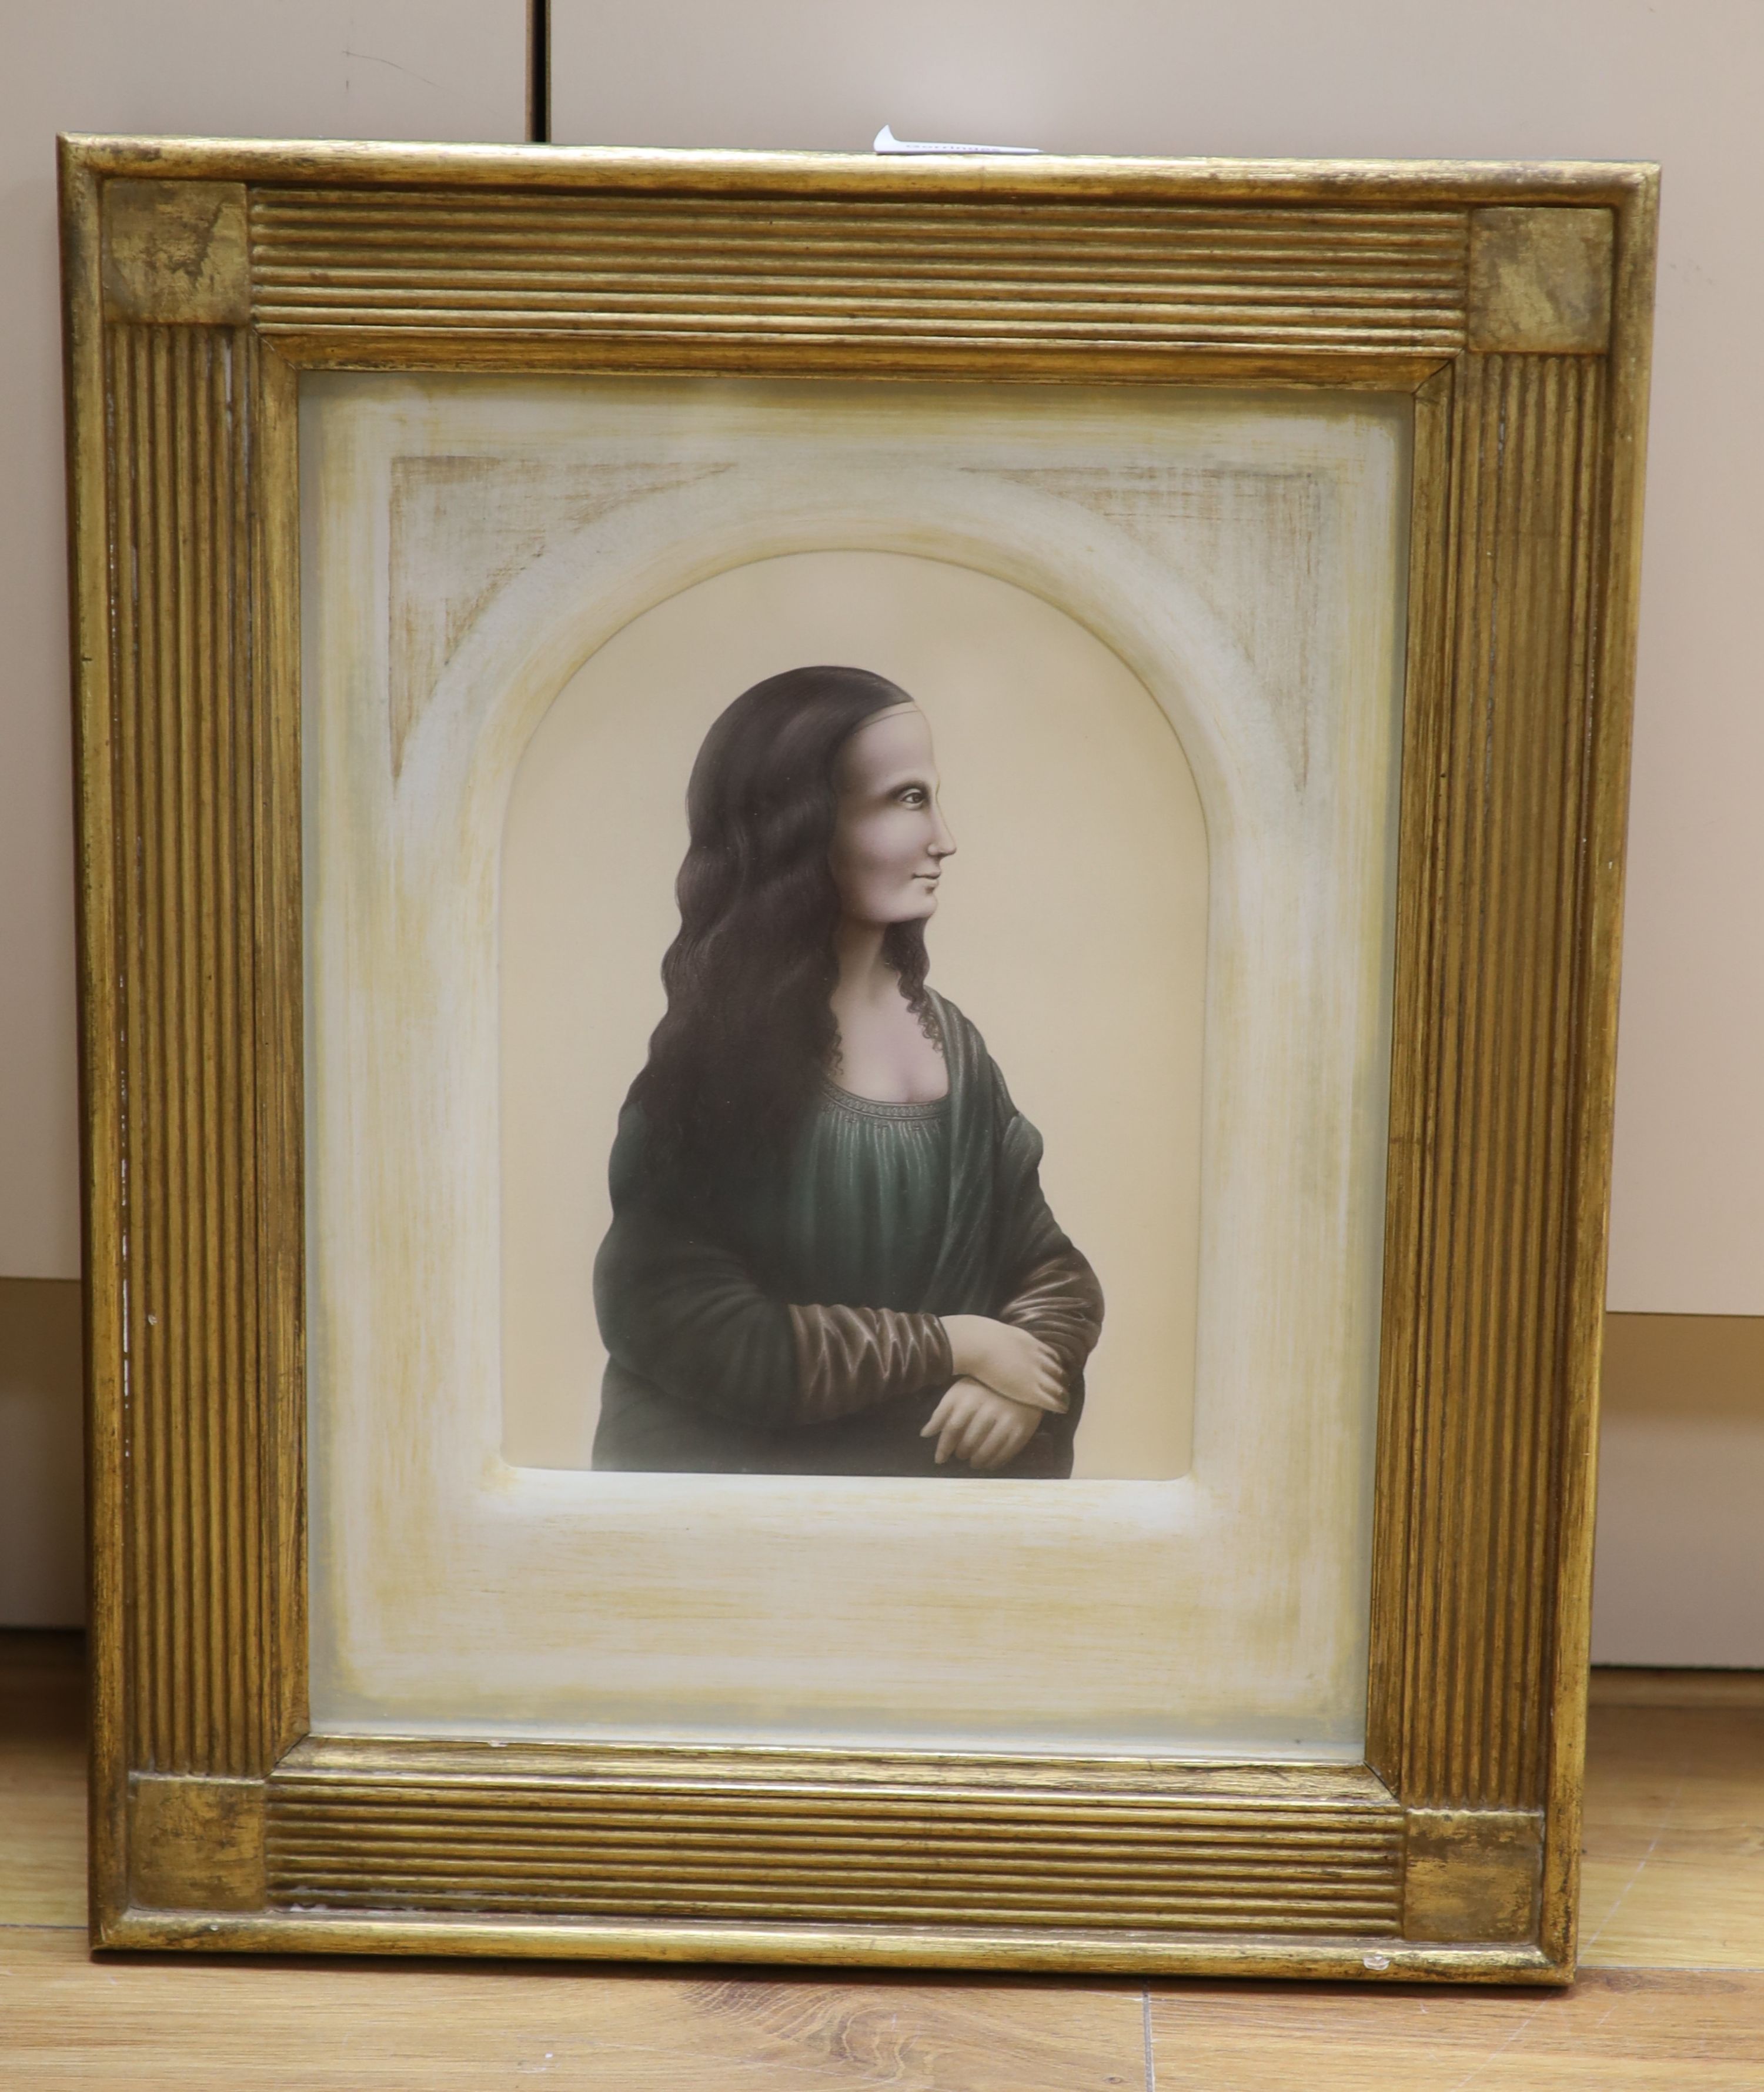 Attributed to David Pelham, tempera, Mona Lisa in an archway, signed and inscribed verso, 24 x 18cm